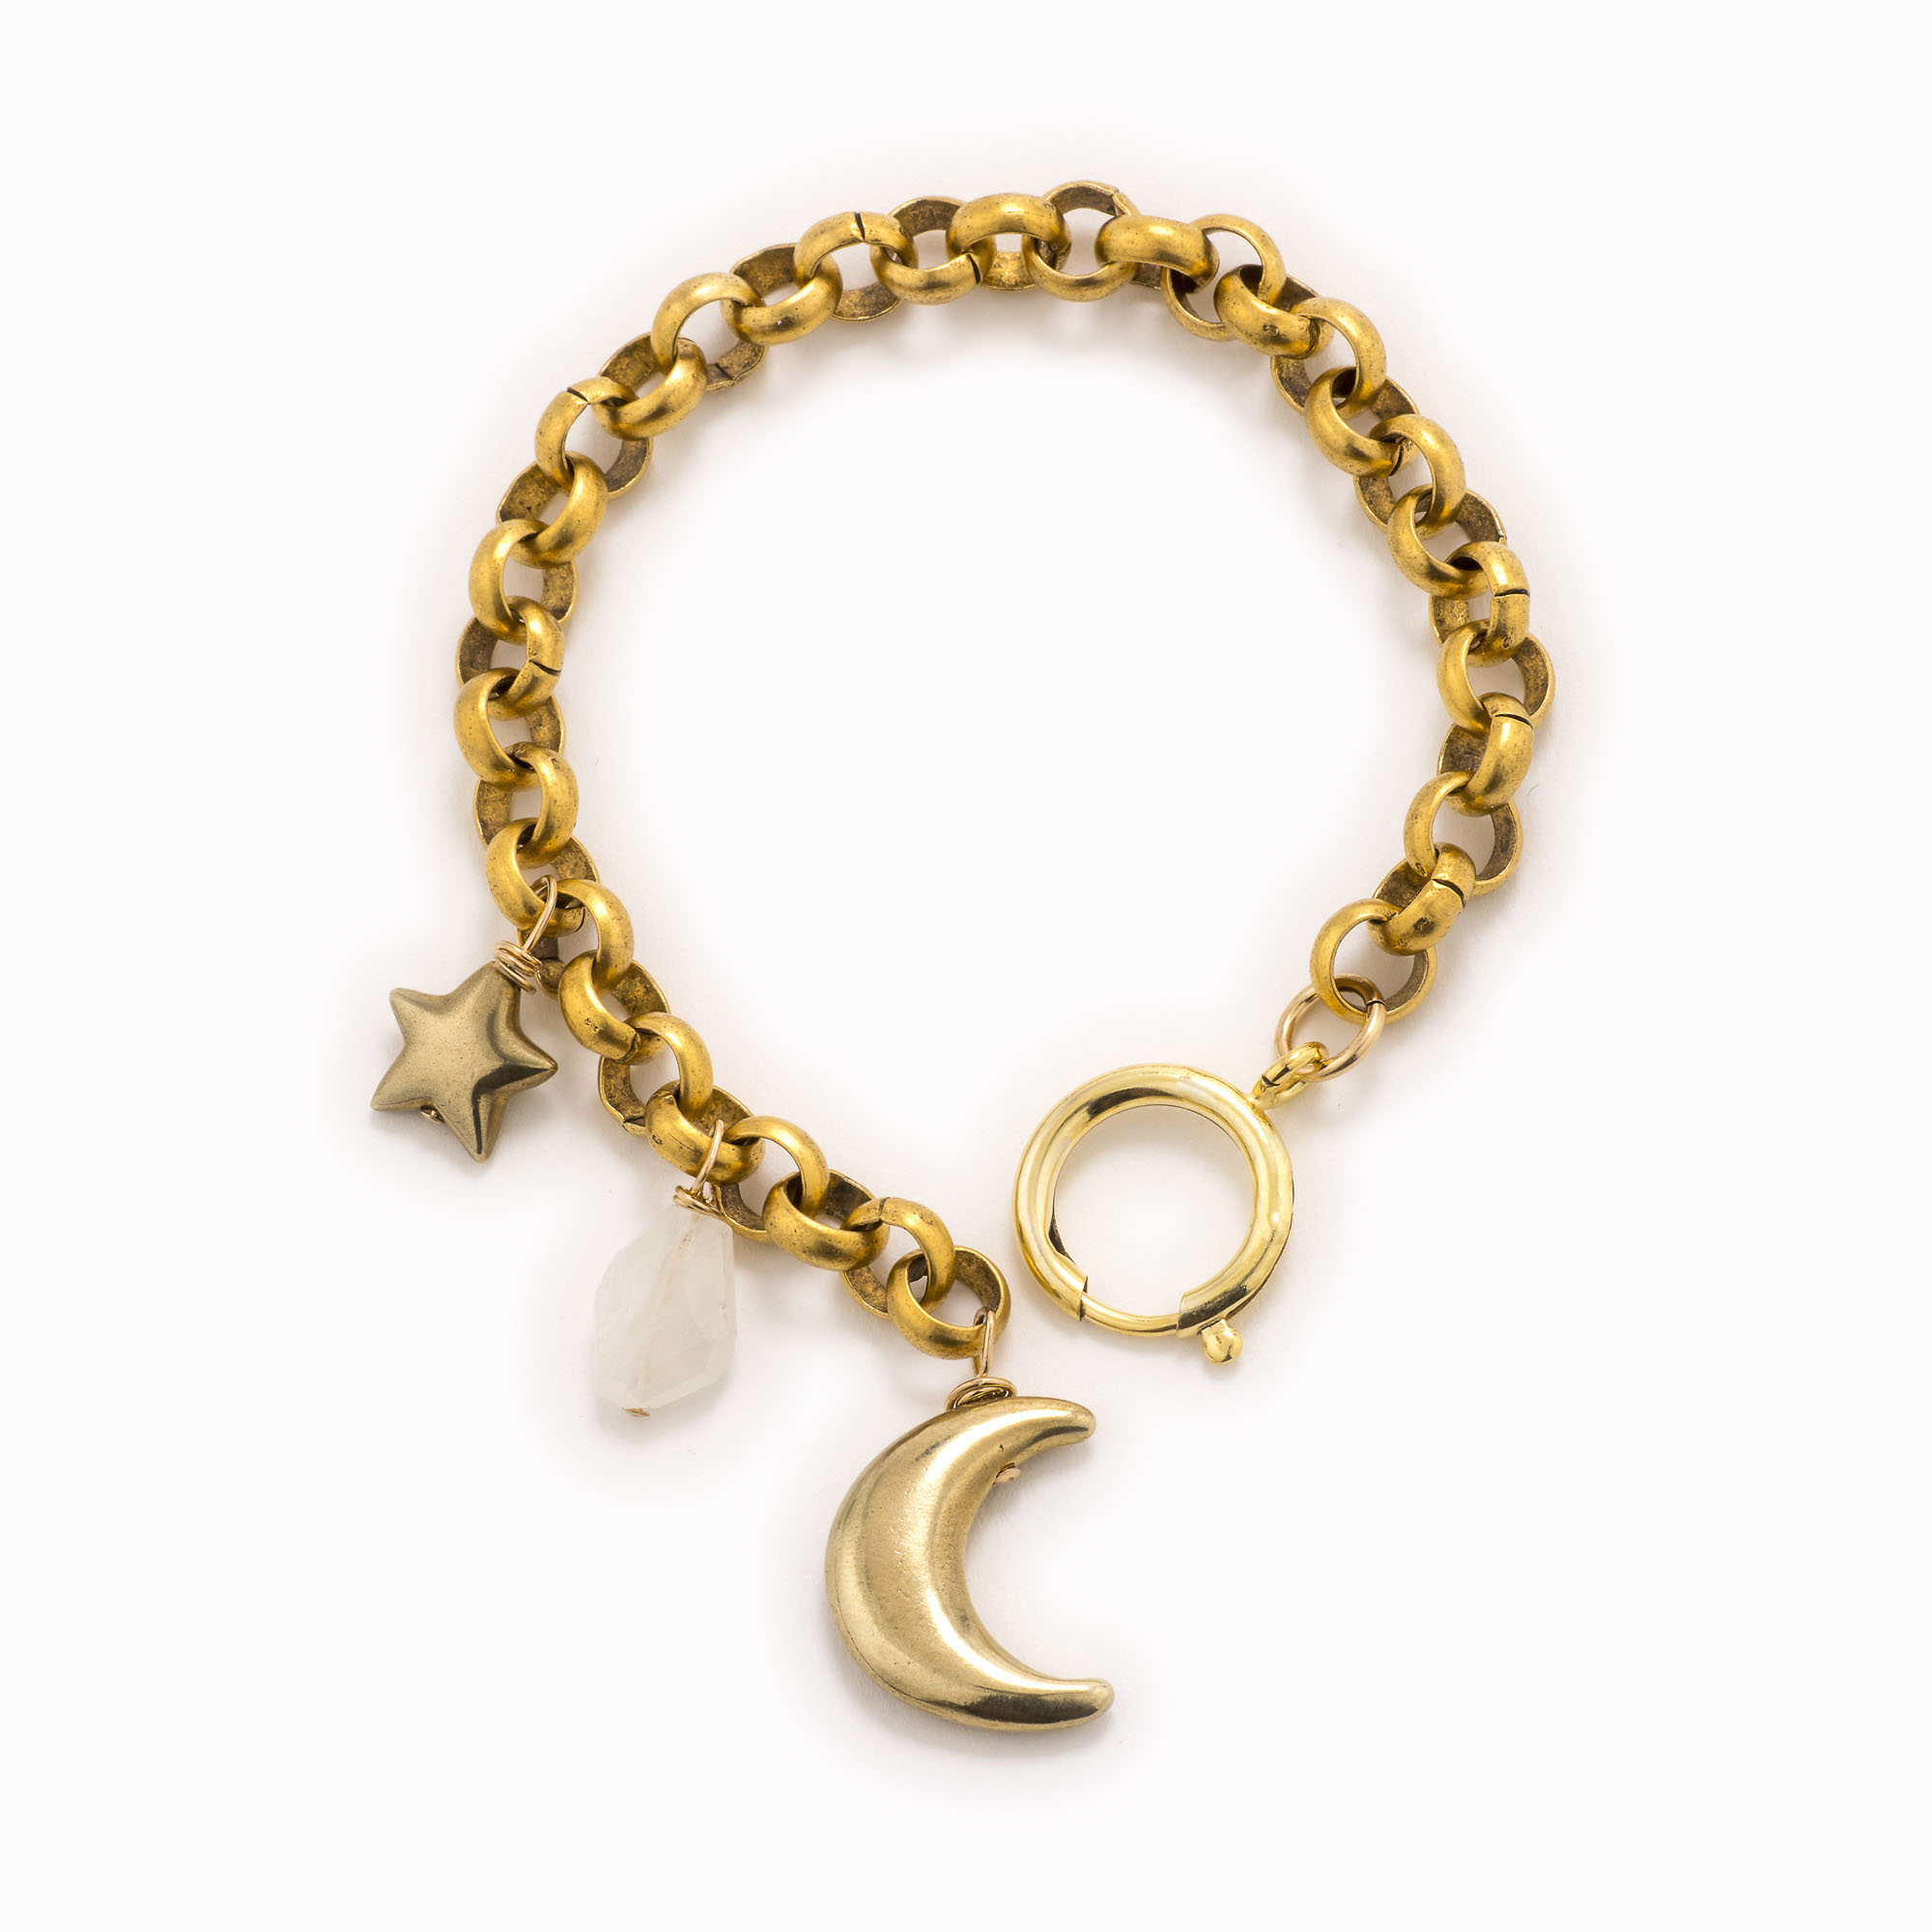 Featured image for “Chloe Brass Charm Bracelet”